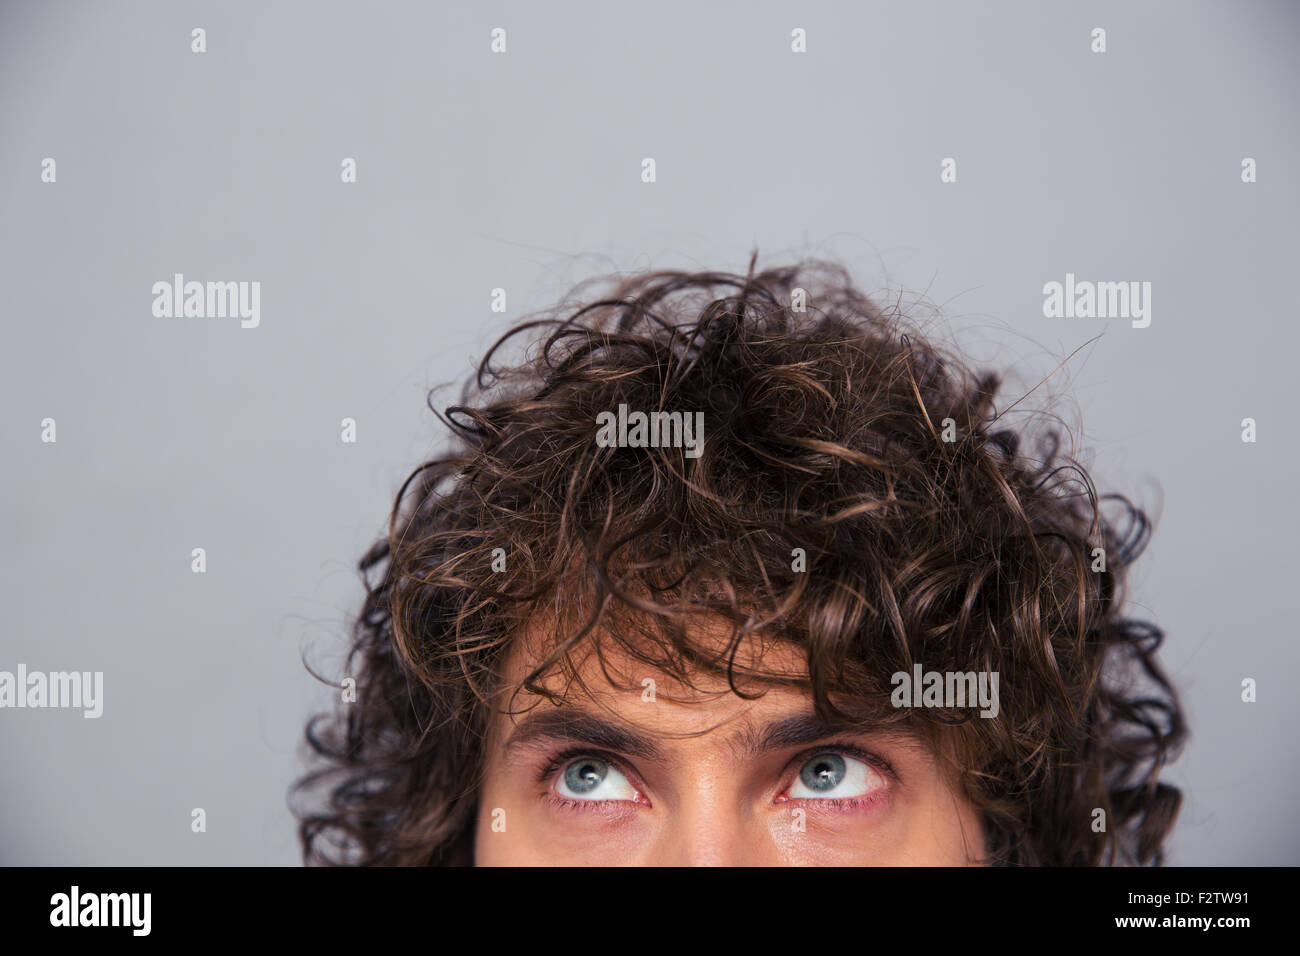 Cropped image of a man with curly hair looking up at copyspace over gray background Stock Photo